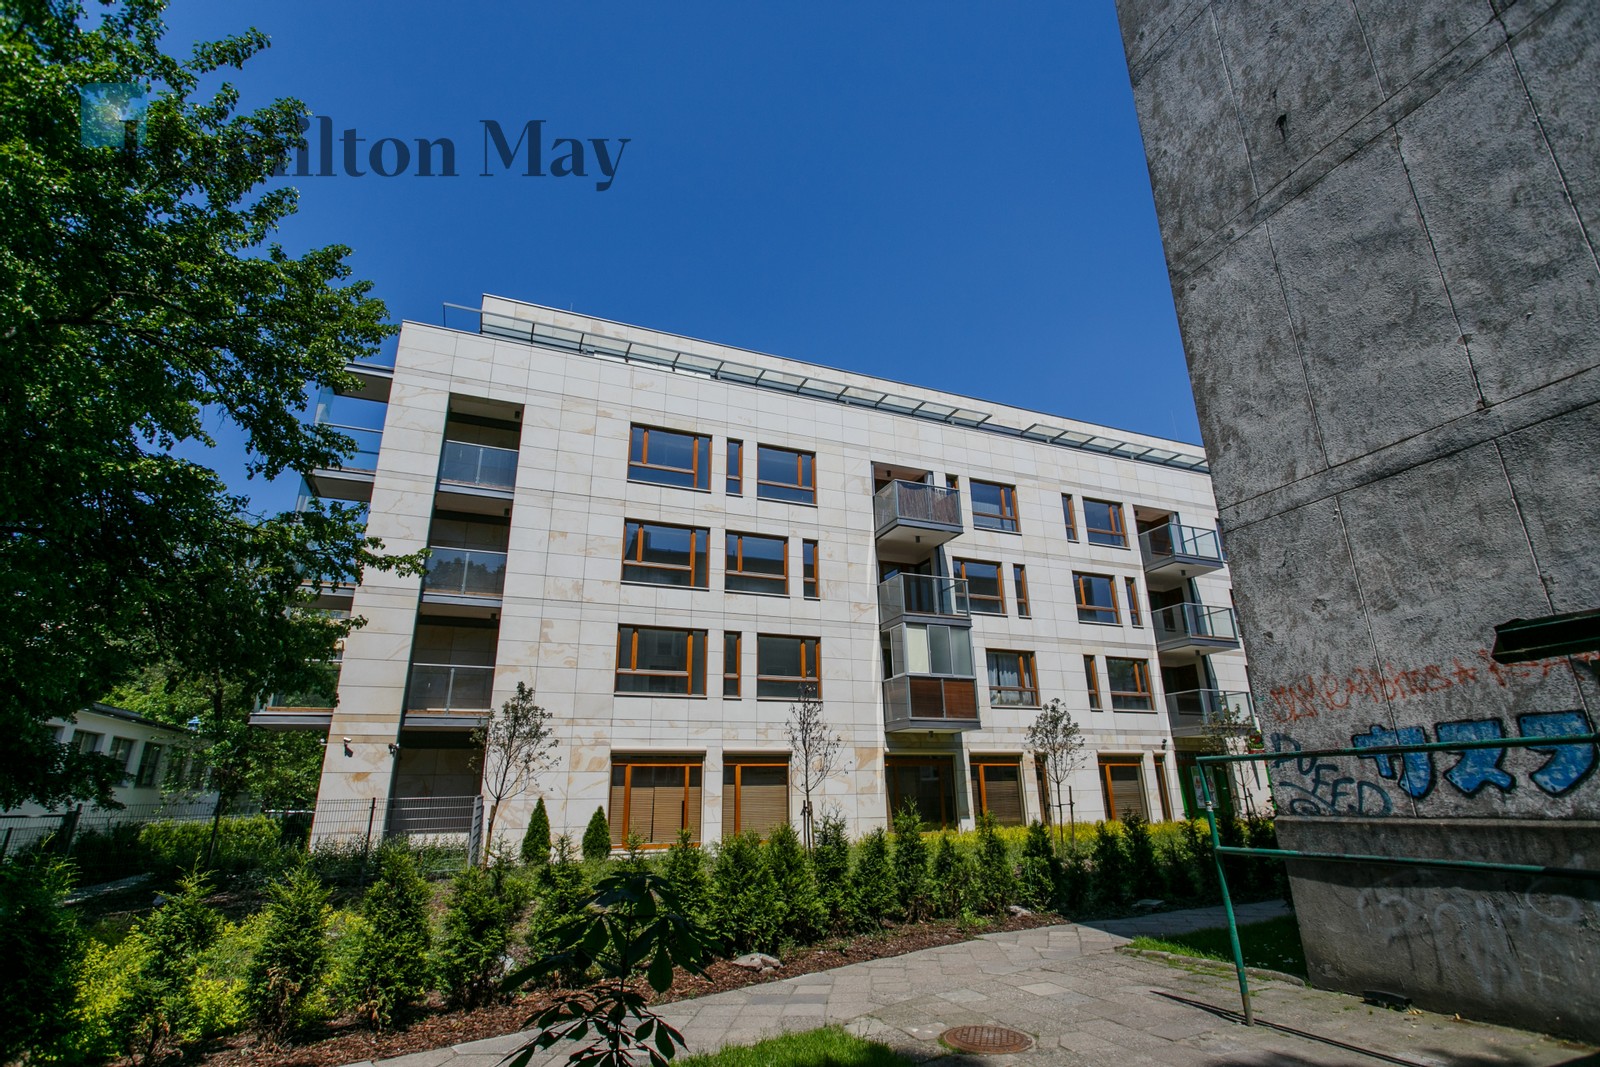 Level: 8 Status: existing Number of units: 70 Sale price from: 494000PLN Avg. sales price/m2: 11900PLN Rental price from: nullPLN - slider